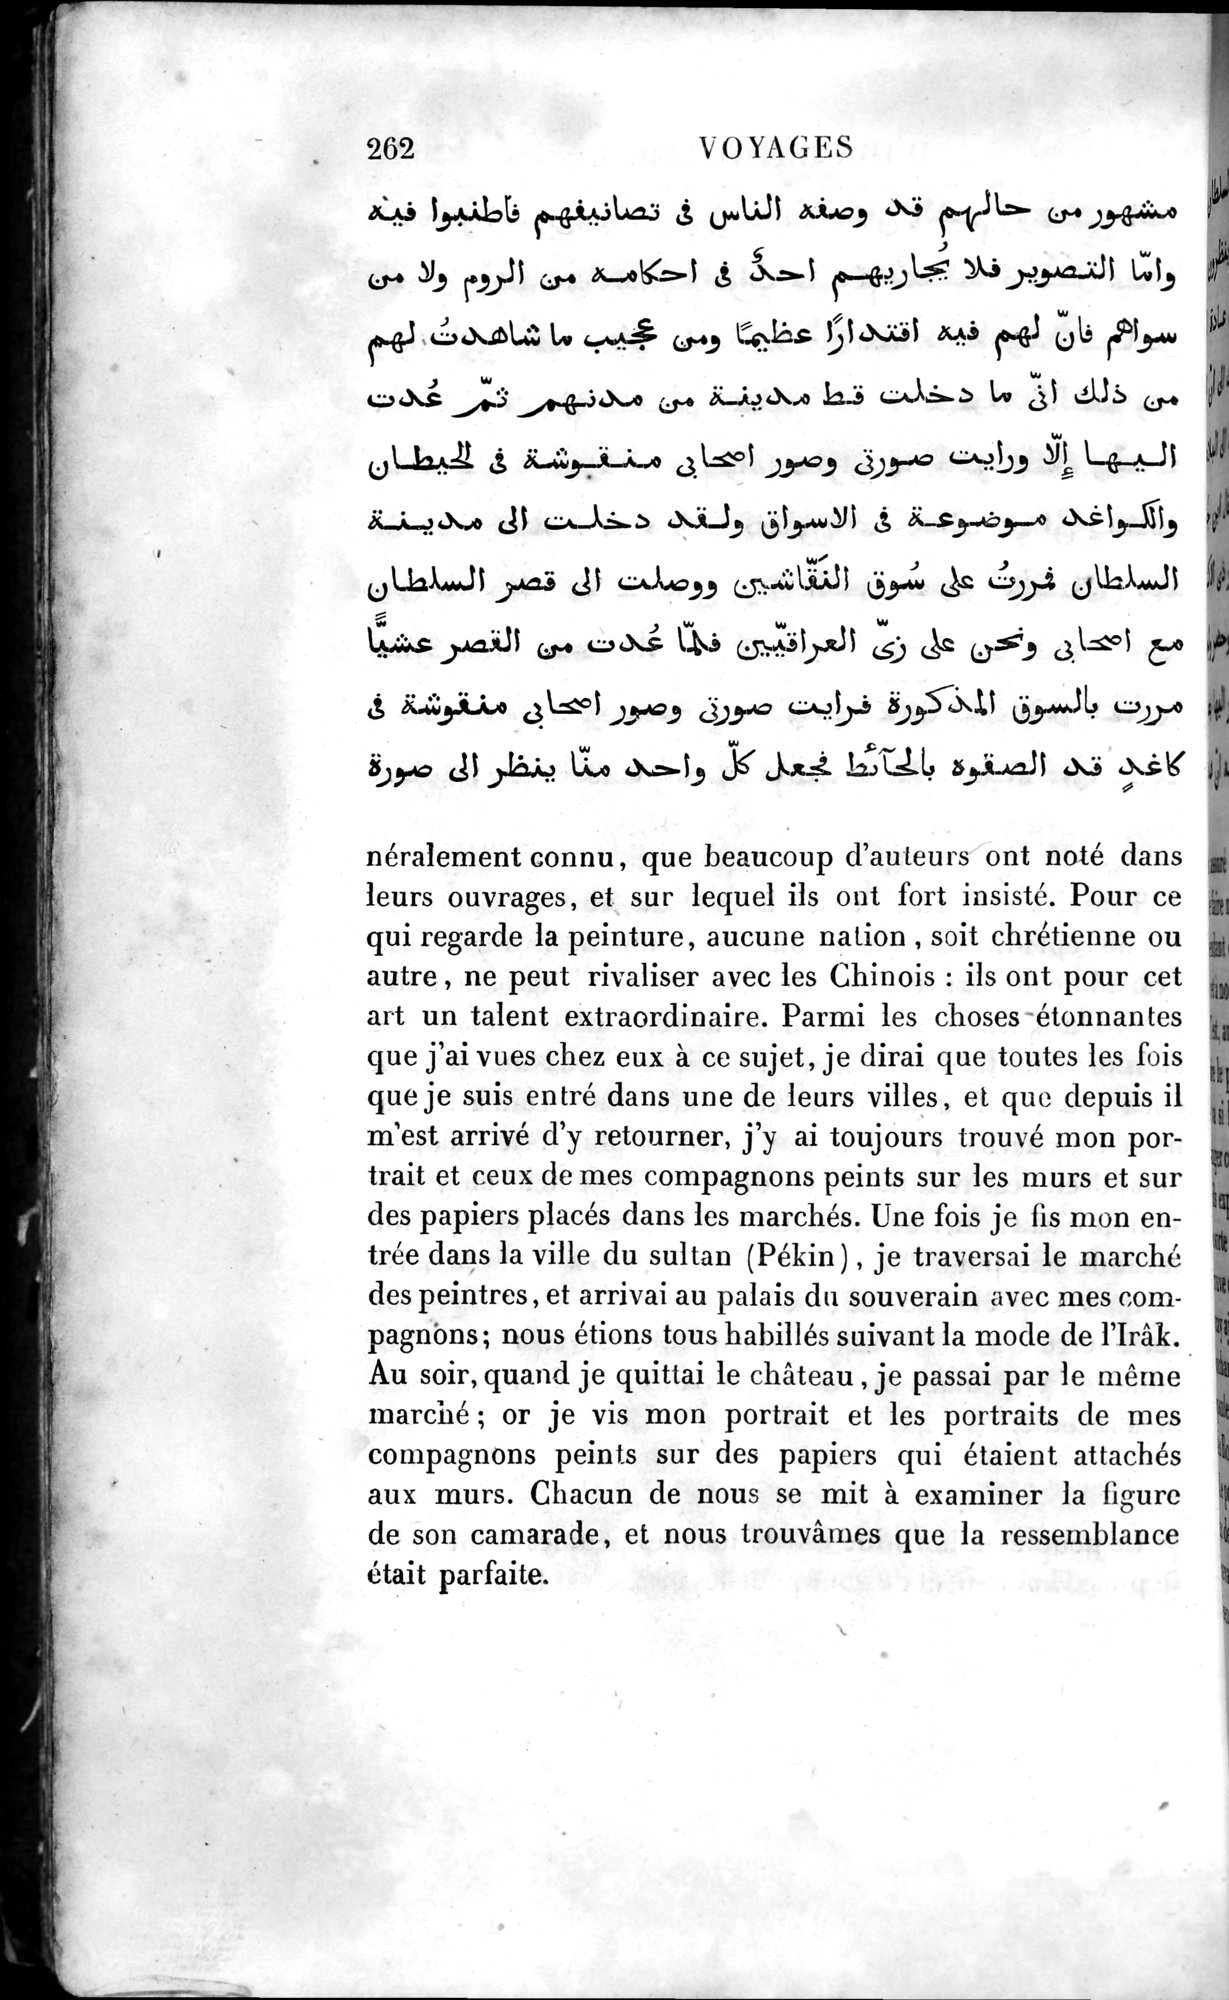 Voyages d'Ibn Batoutah : vol.4 / Page 274 (Grayscale High Resolution Image)